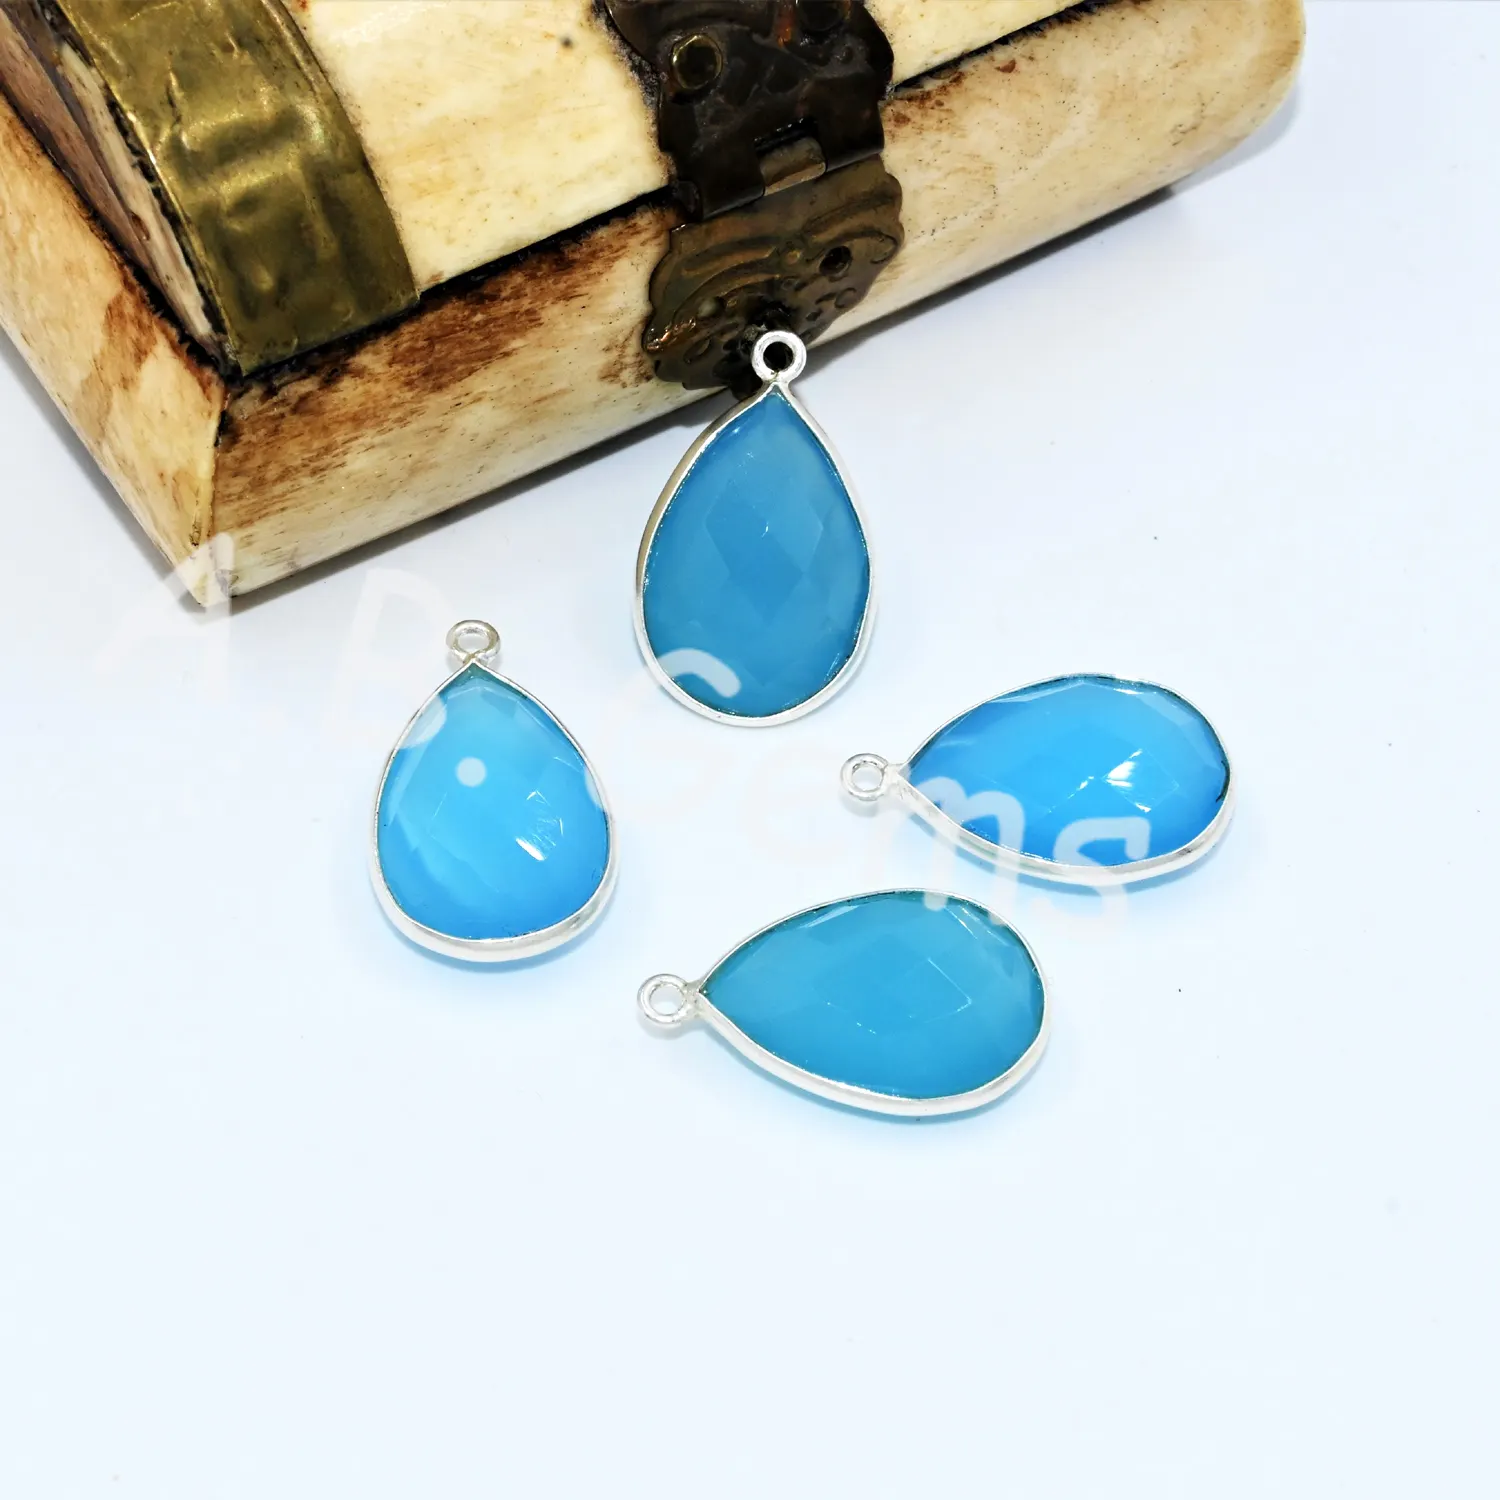 Chalcedony Pear Shape Driolette Charm For Gift 925 Sterling Silver Pendant Amazing Handmade Jewelry Women Pendants 12x16 mm 4 Pc